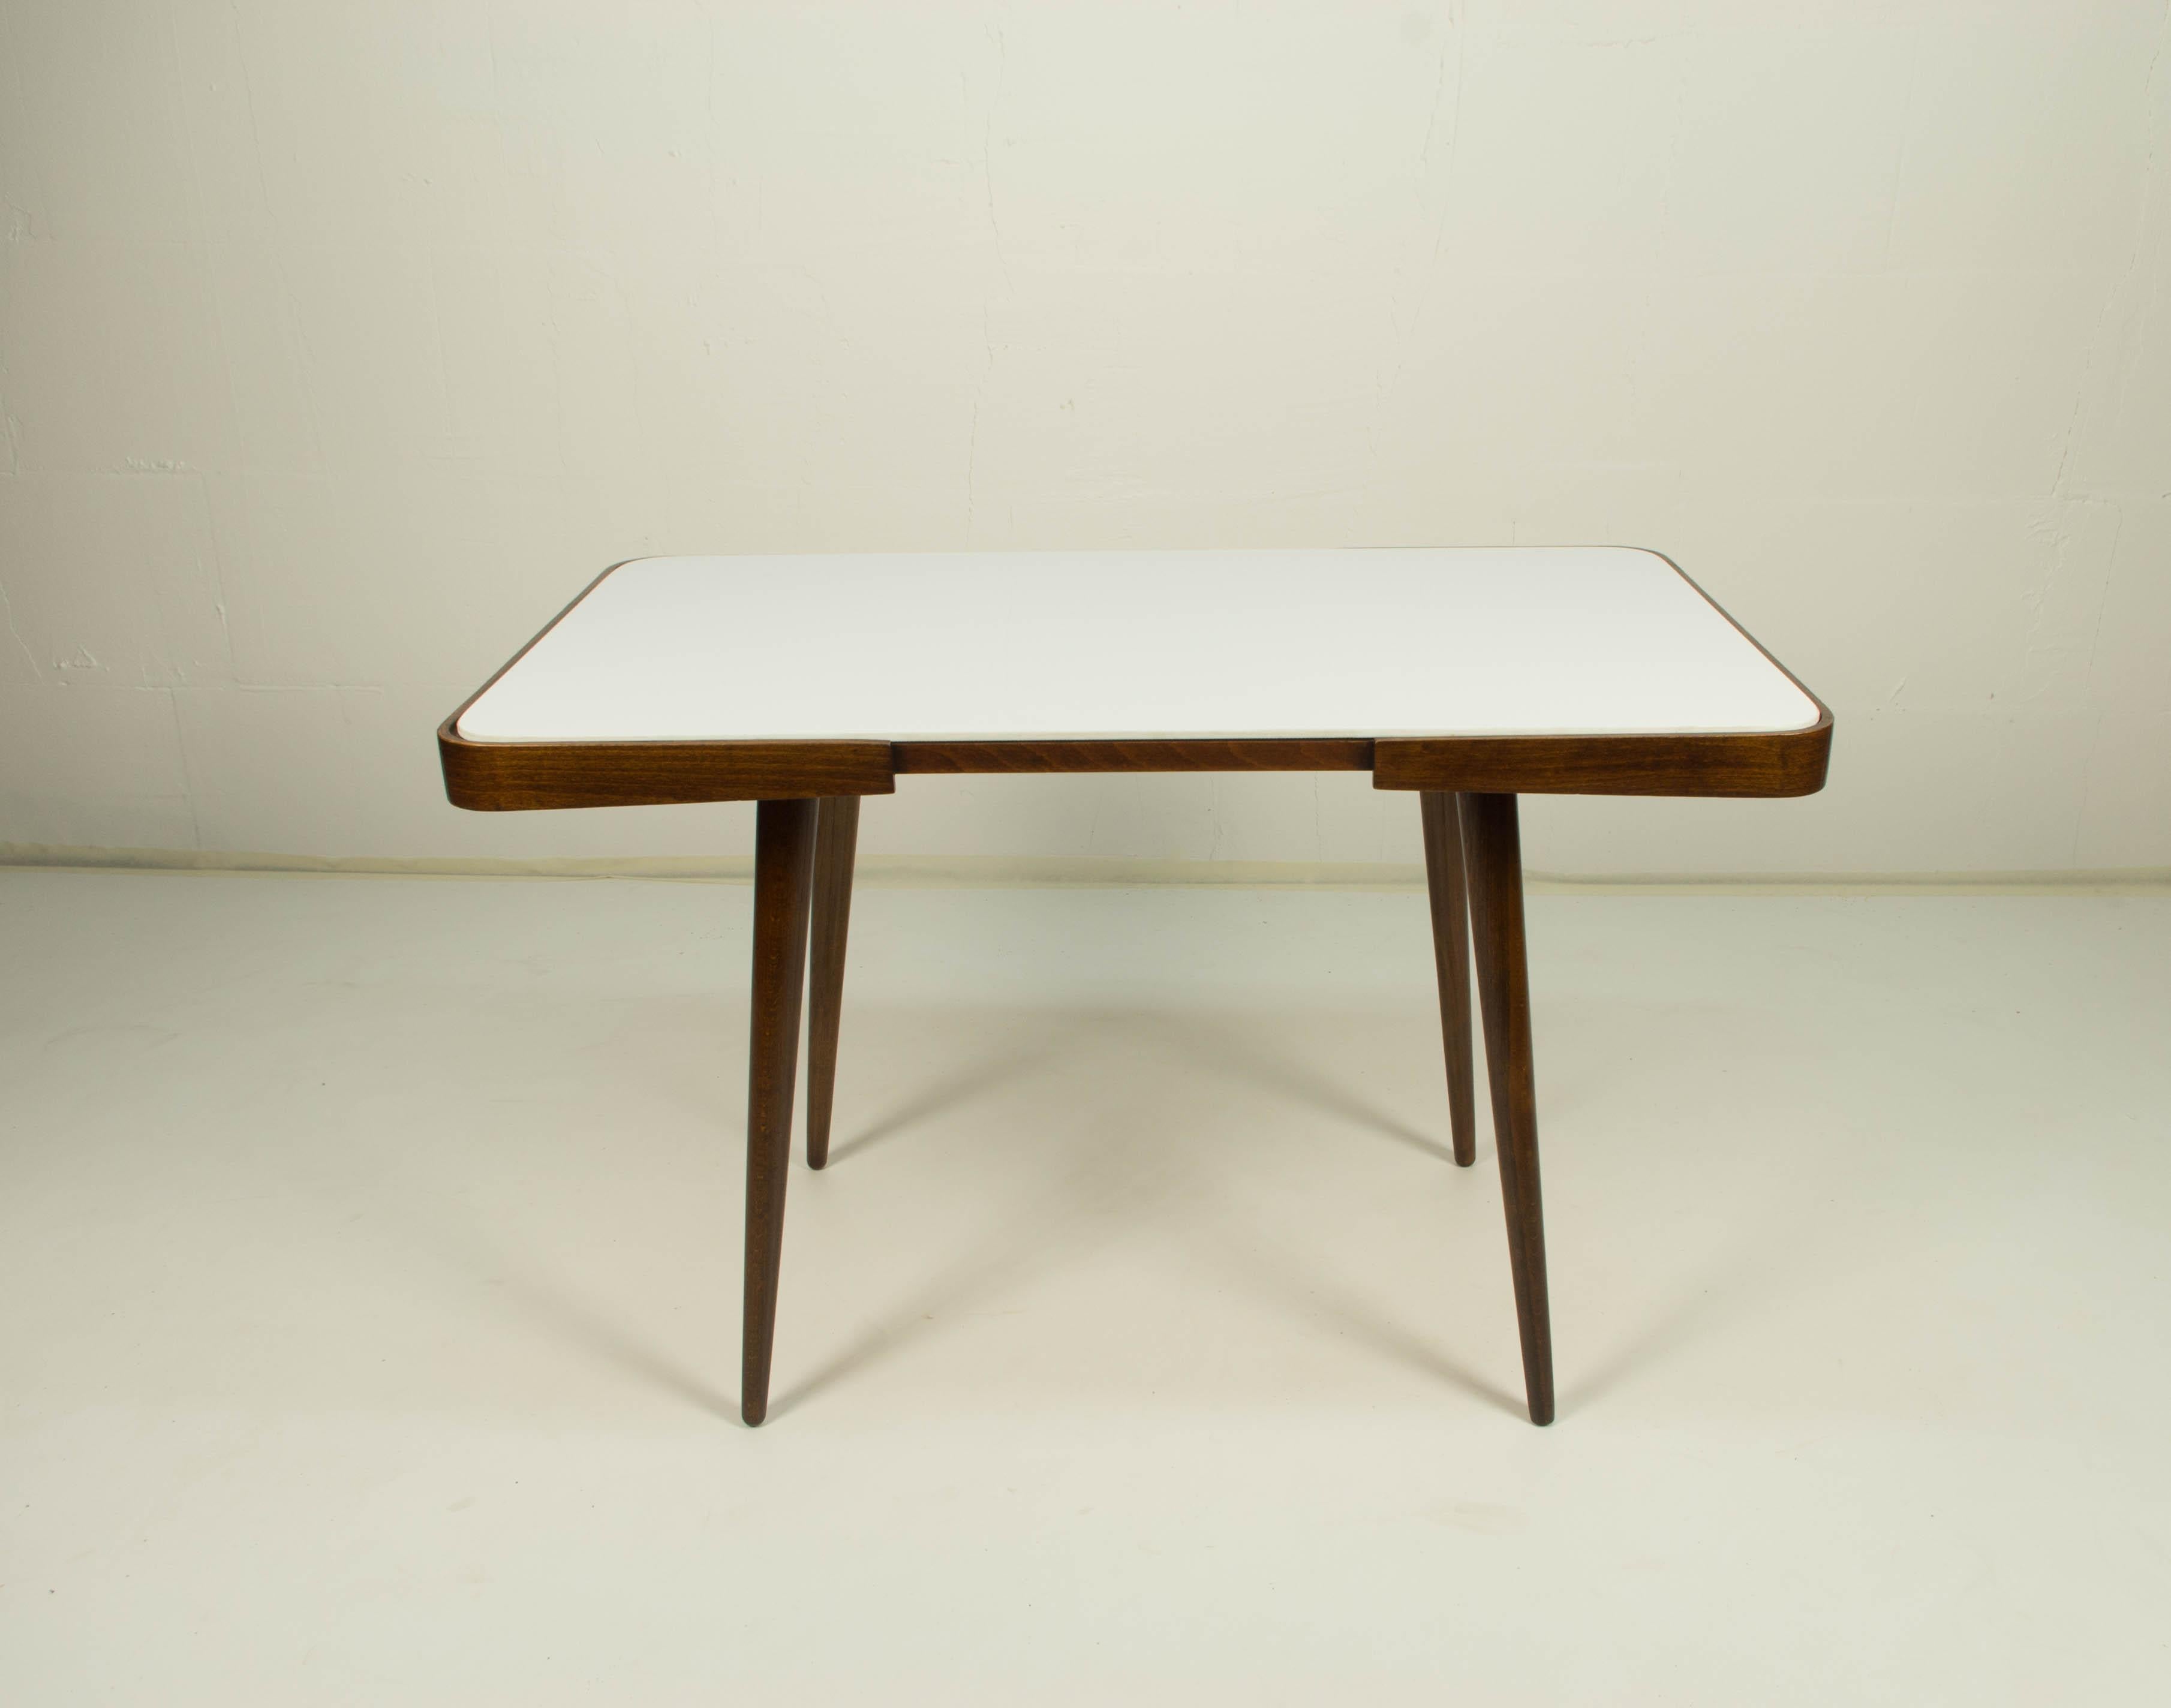 Coffee table with white glass top, mid-1960s. Designed by Jiri Jiroutek for Interier Praha. Original very good condition, wood polished.